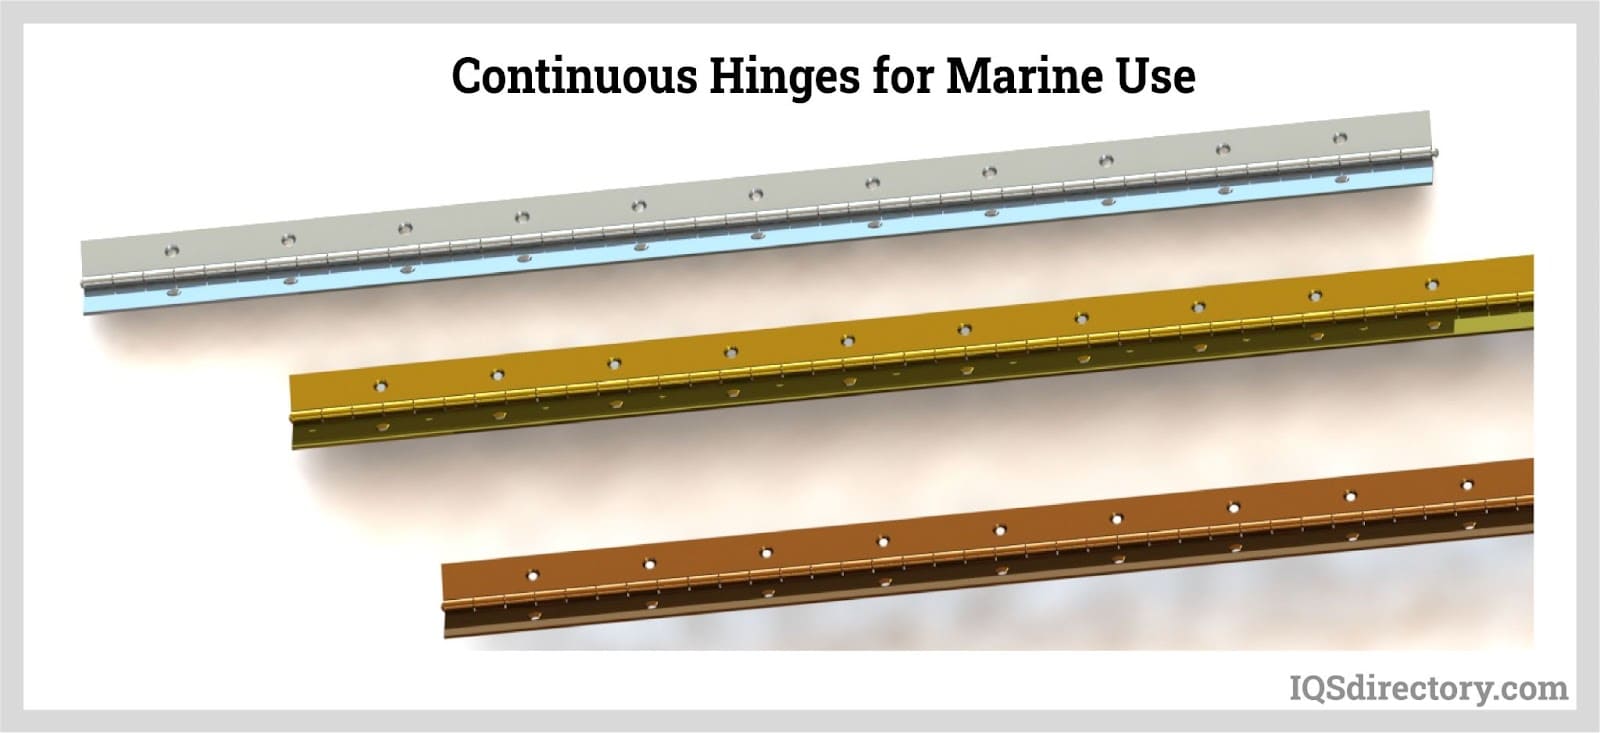 Continuous Hinges for Marine Use